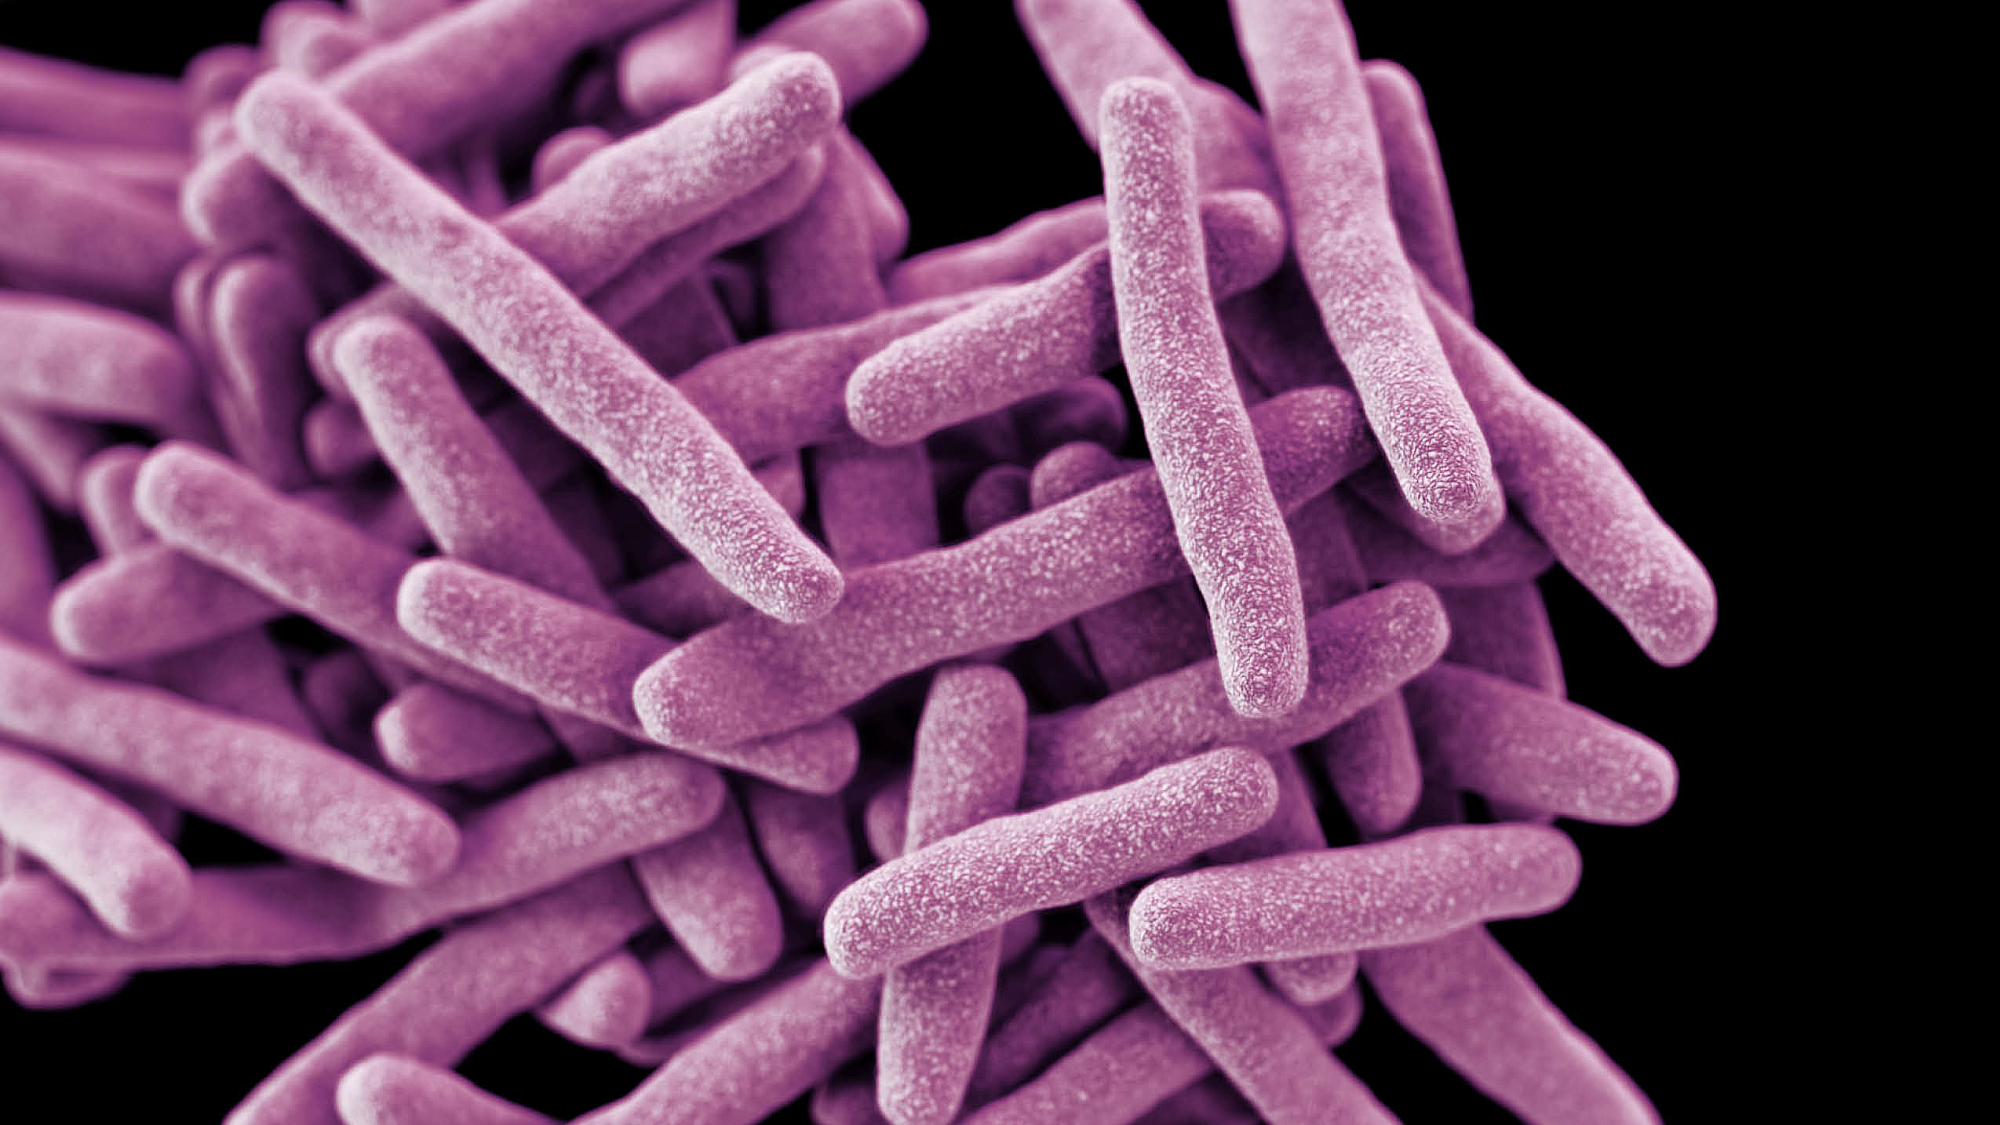 Drug-resistant tuberculosis Centers for Disease Control and Prevention